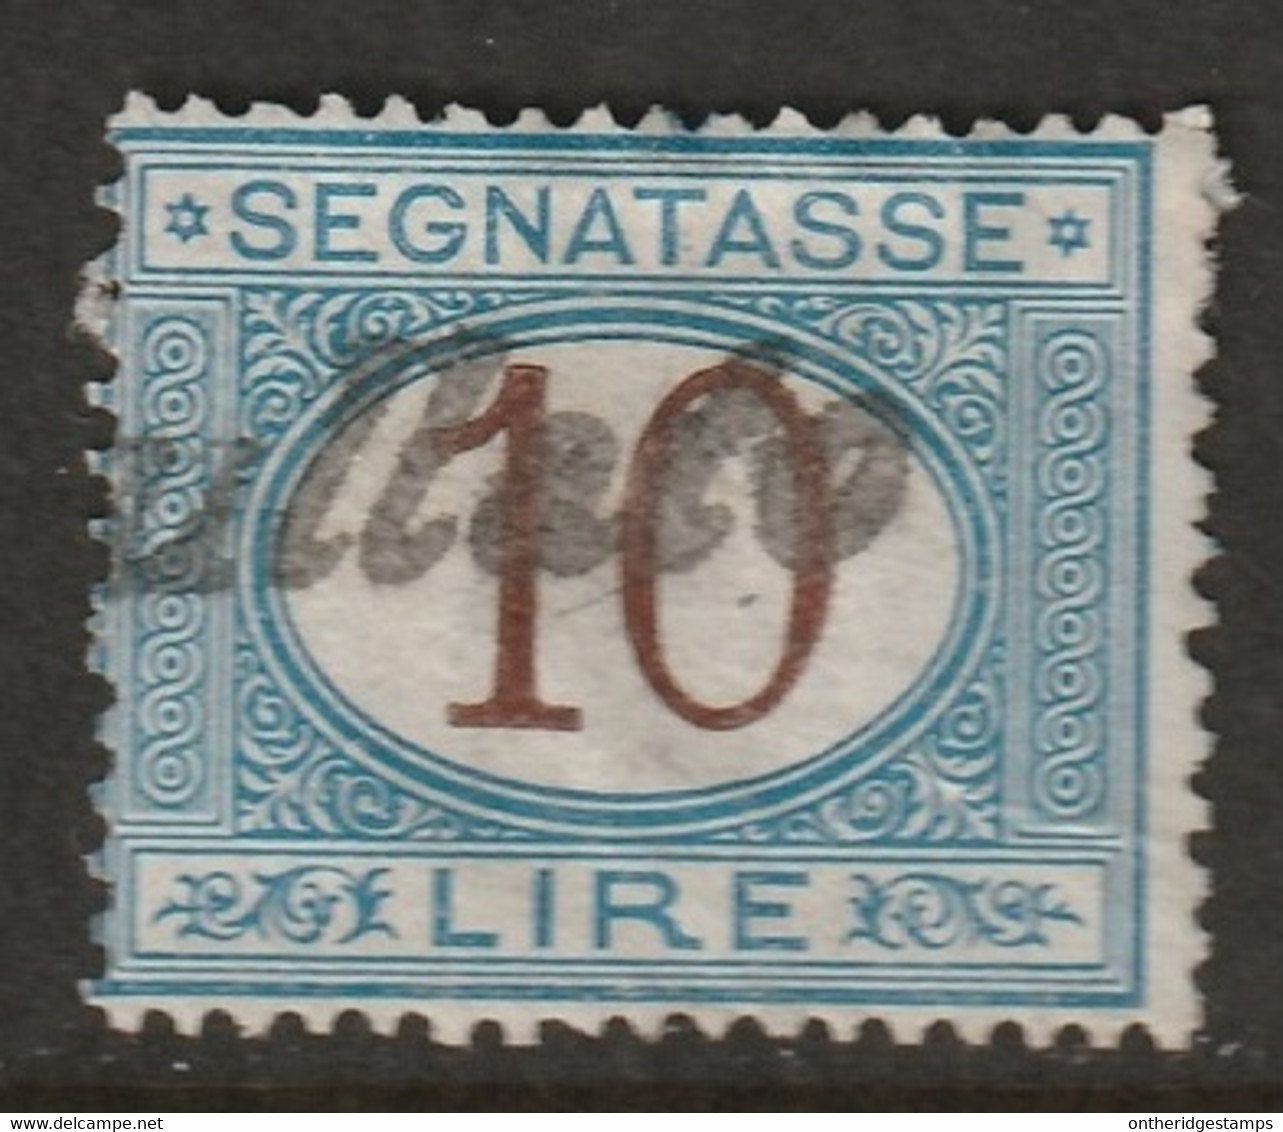 Italy 1874 Sc J19 Sa Seg14 Yt T18 Postage Due Used - Strafport